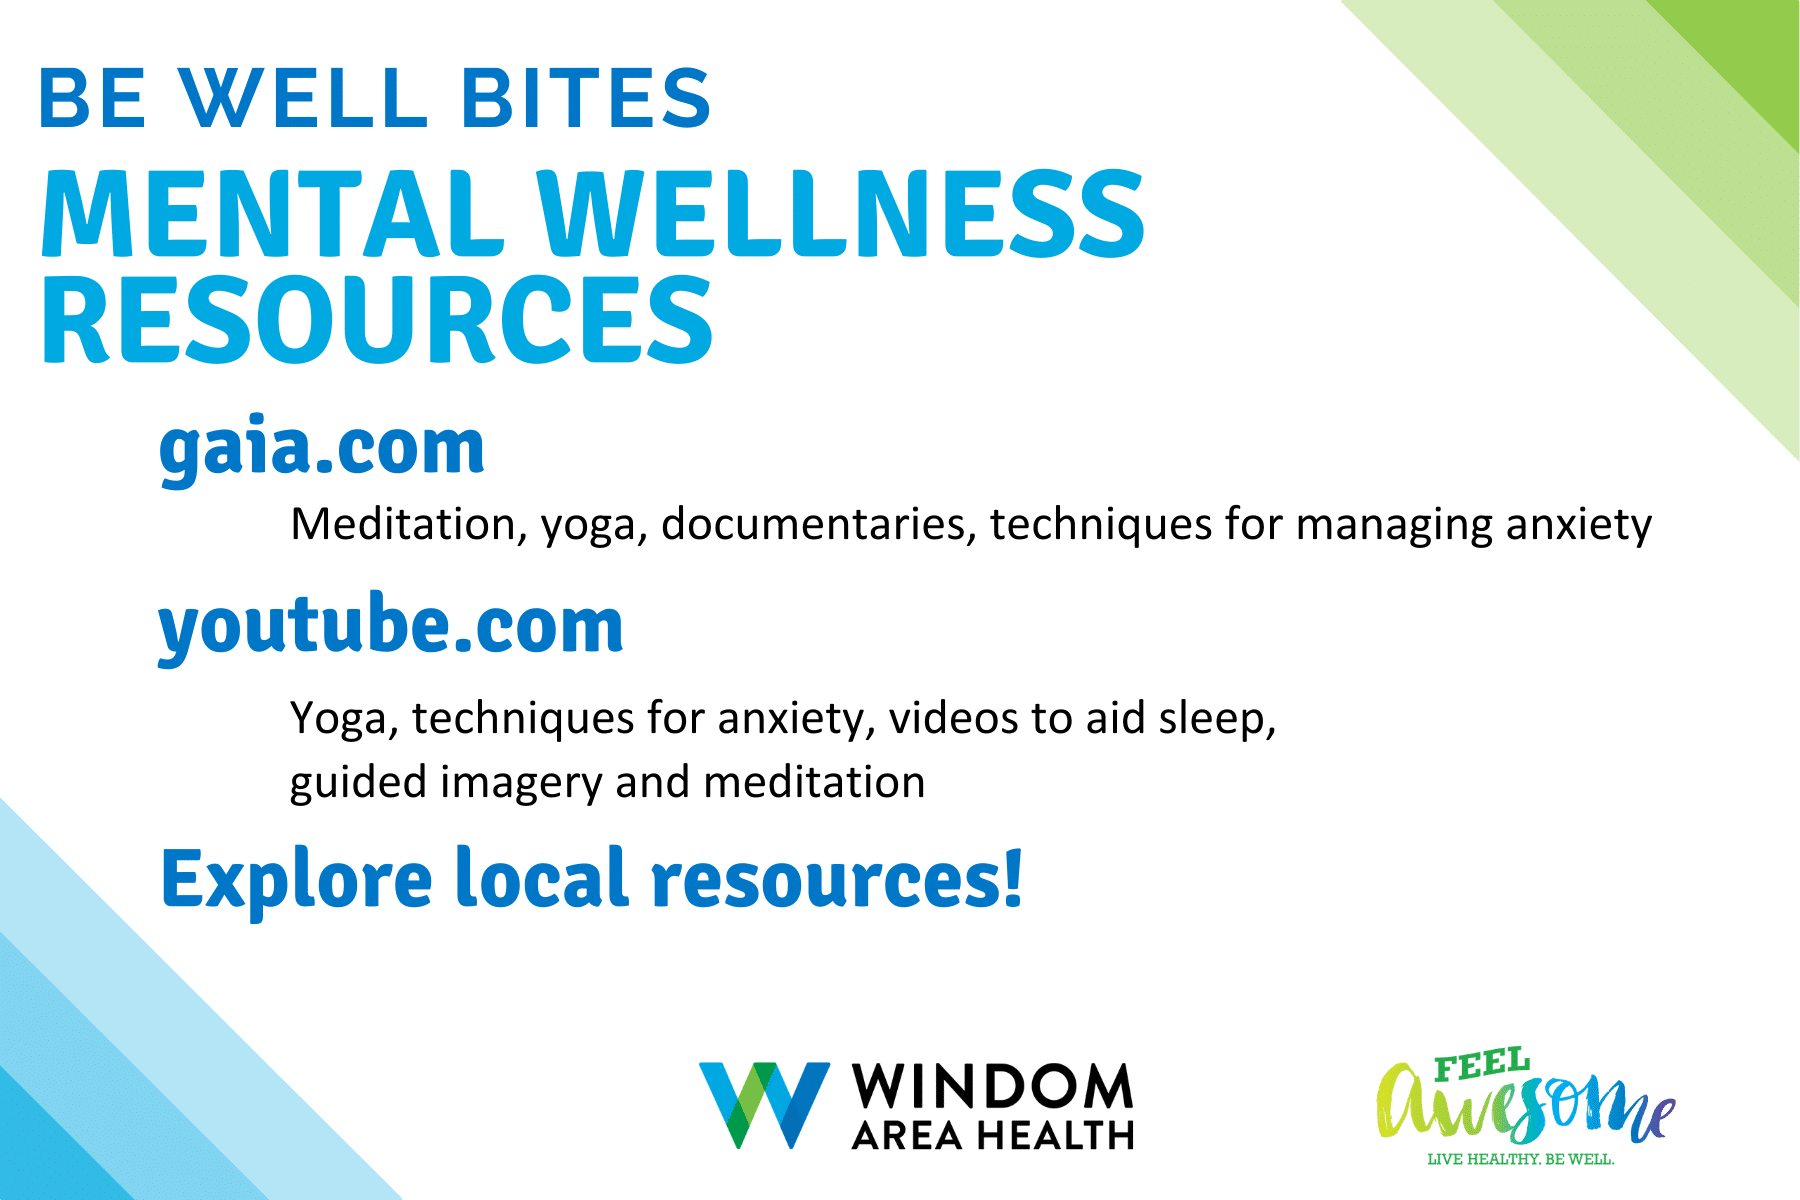 Be Well Bites Wellness Resources